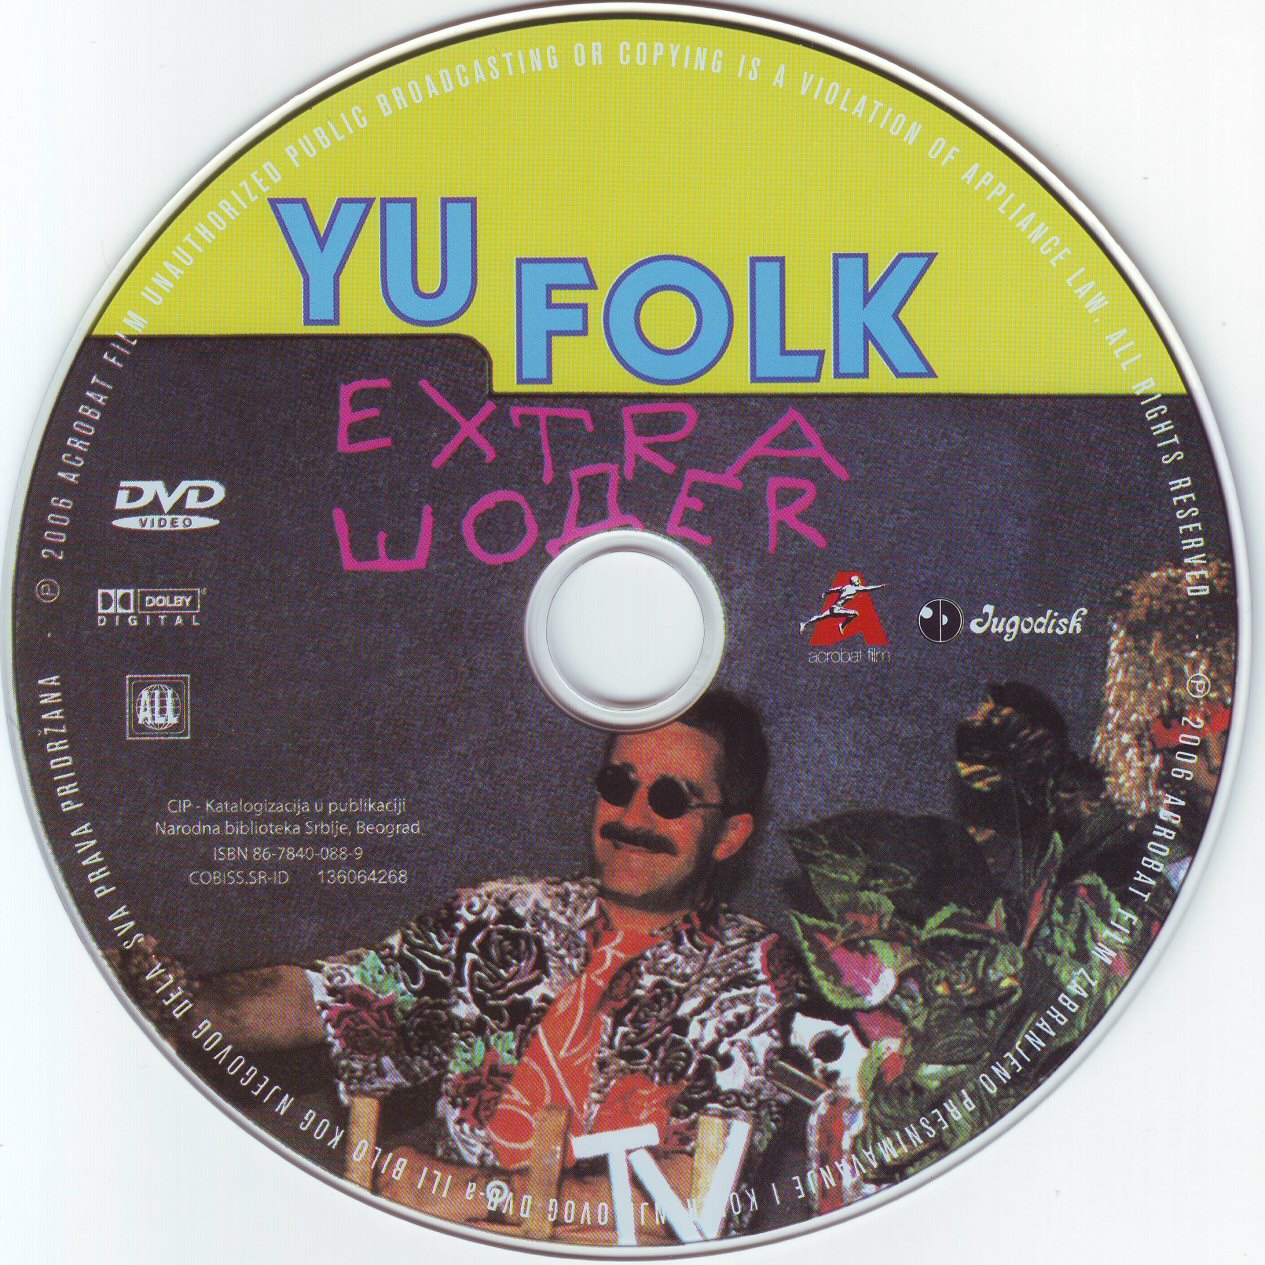 Click to view full size image -  DVD Cover - Y - DVD - YU FOLK EXTRA SODER - CD - DVD - YU FOLK EXTRA SODER - CD.jpg